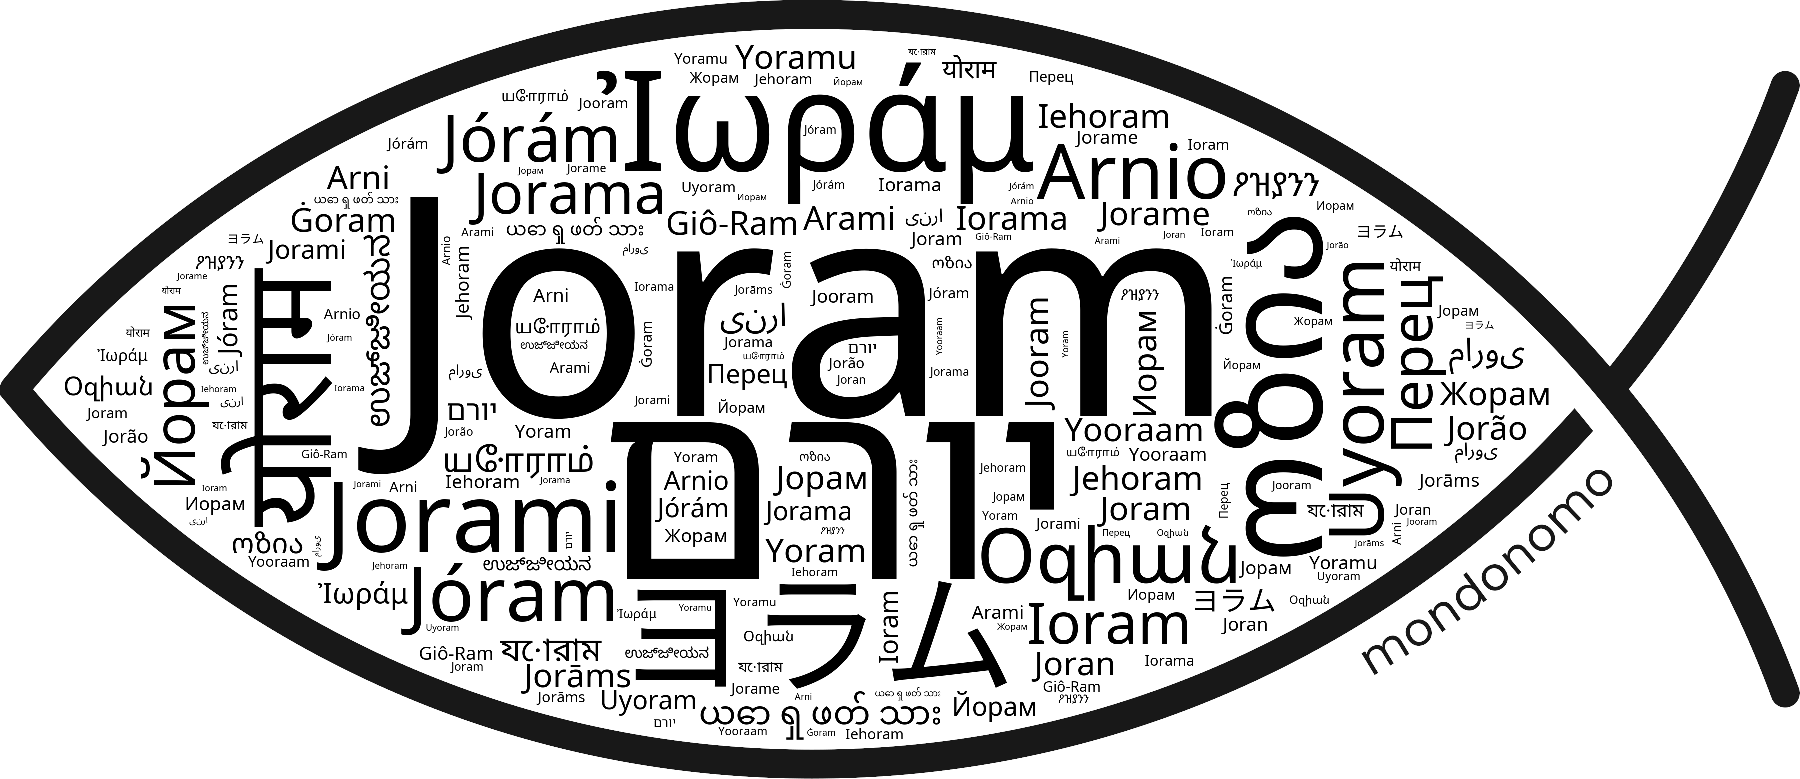 Name Joram in the world's Bibles